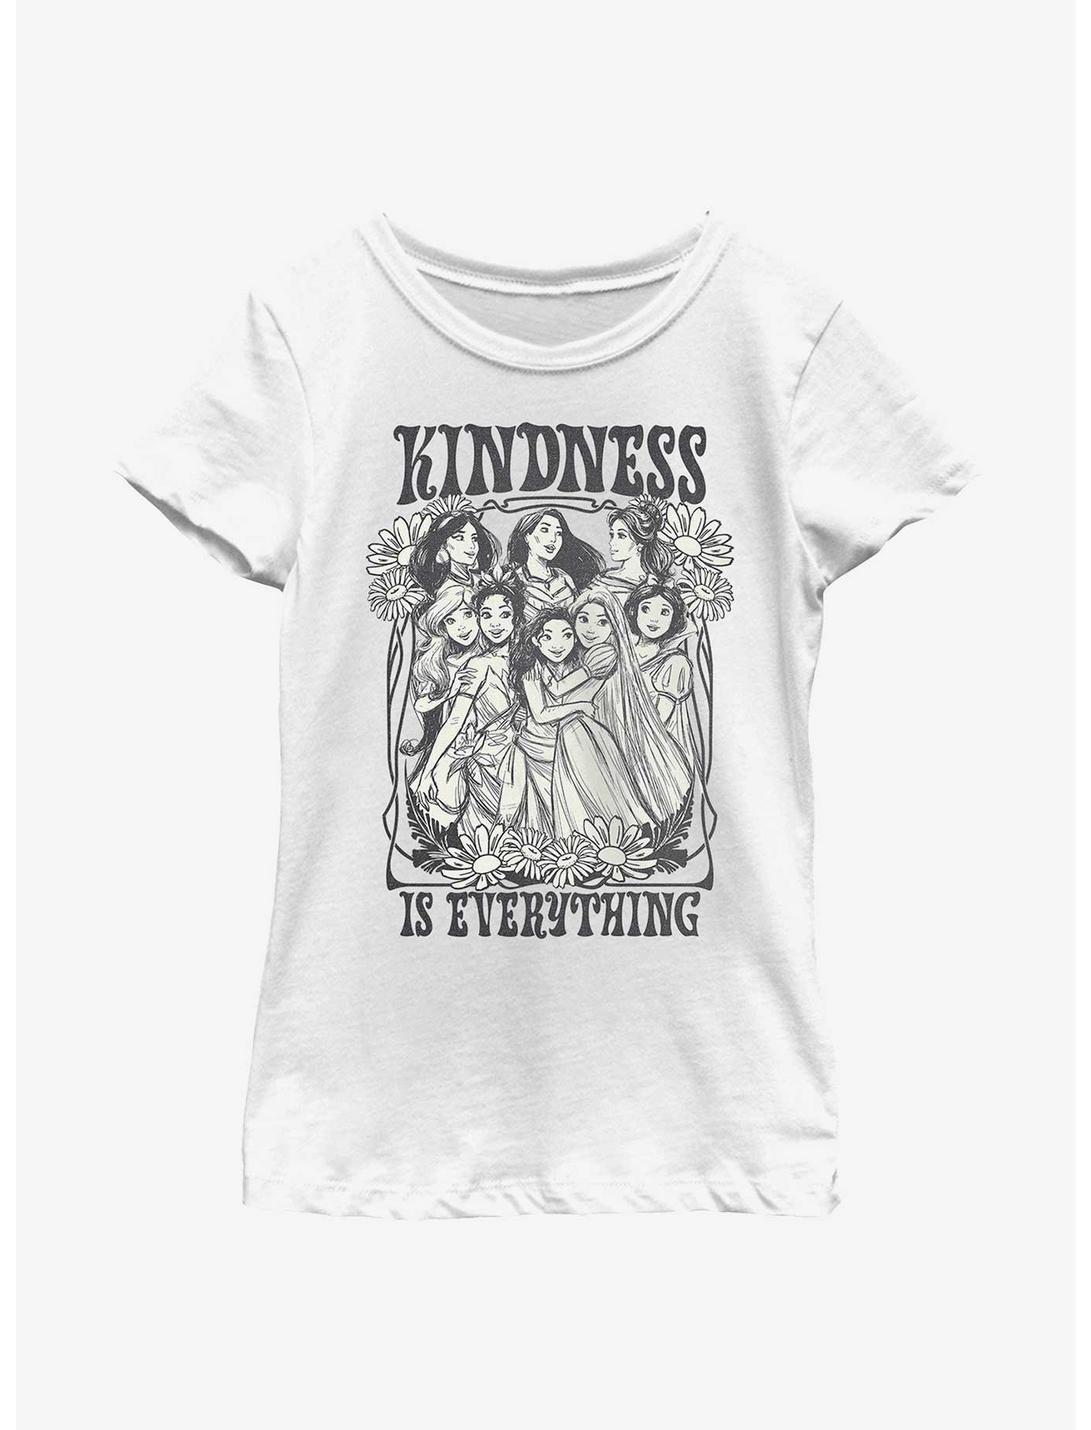 Disney Princesses Kindness Is Everything Youth Girls T-Shirt, WHITE, hi-res